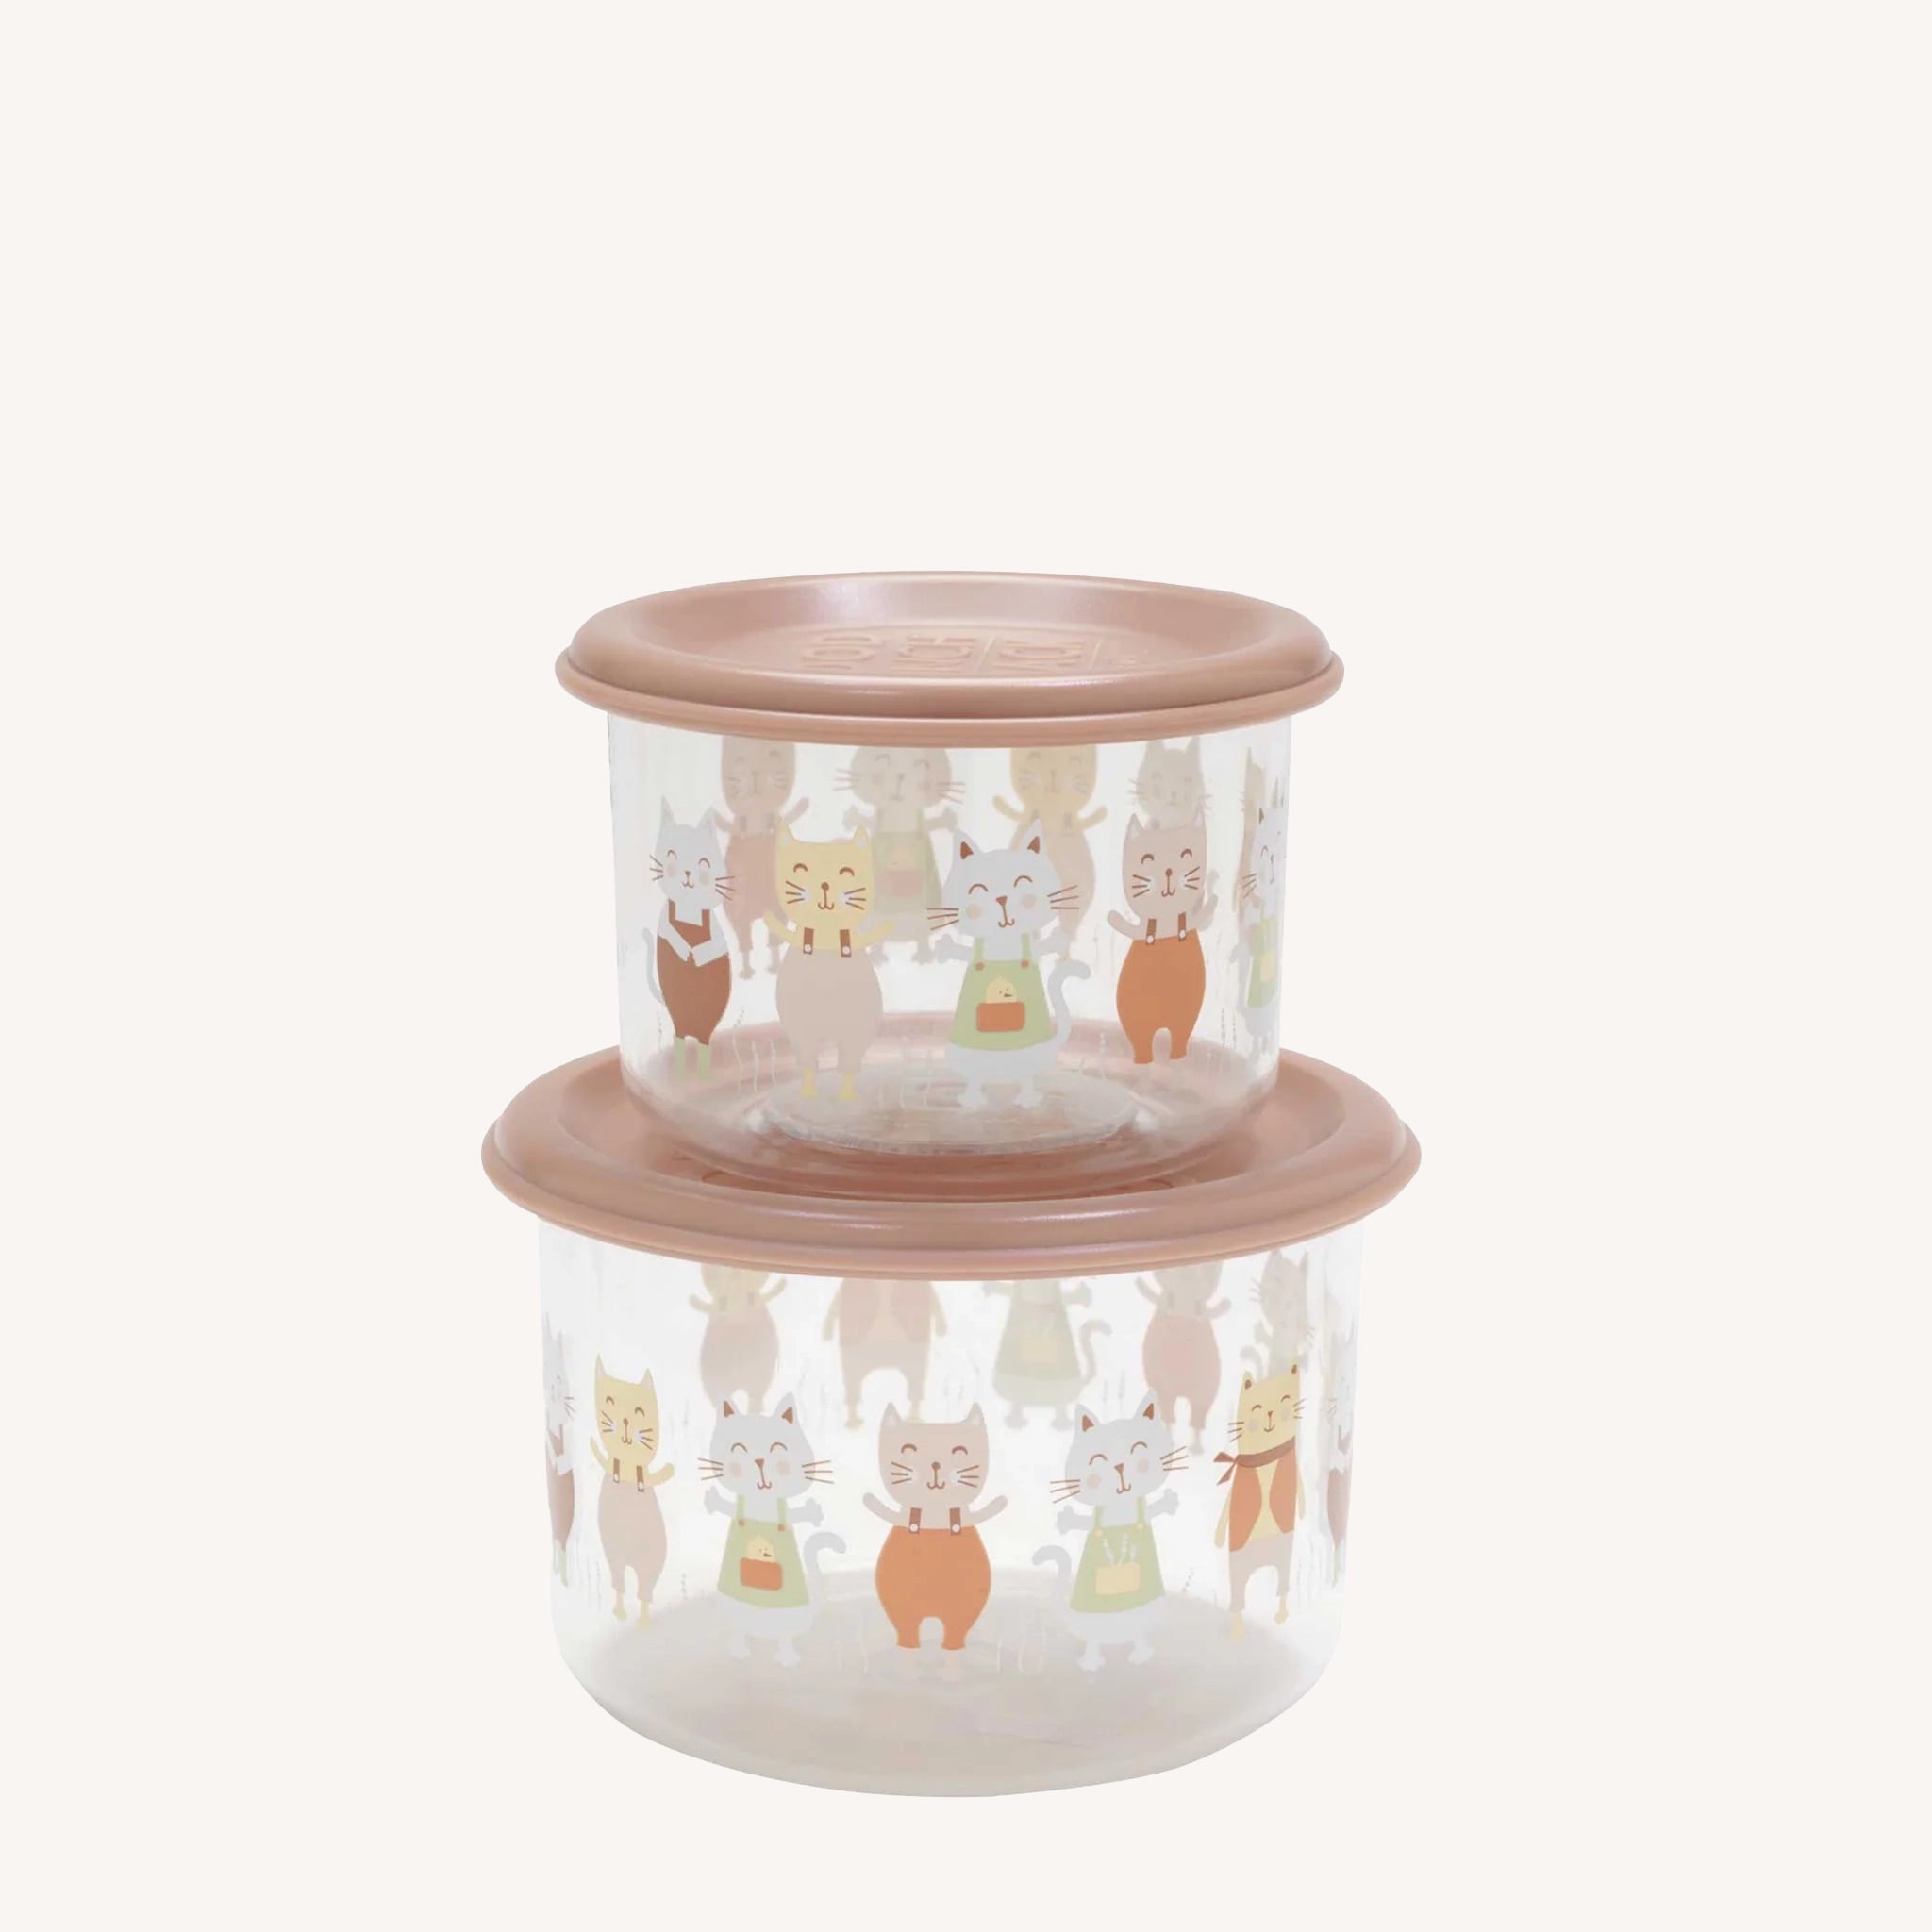 On a white background is a set of containers with cats illustrations wrapped around the middle of the containers. 